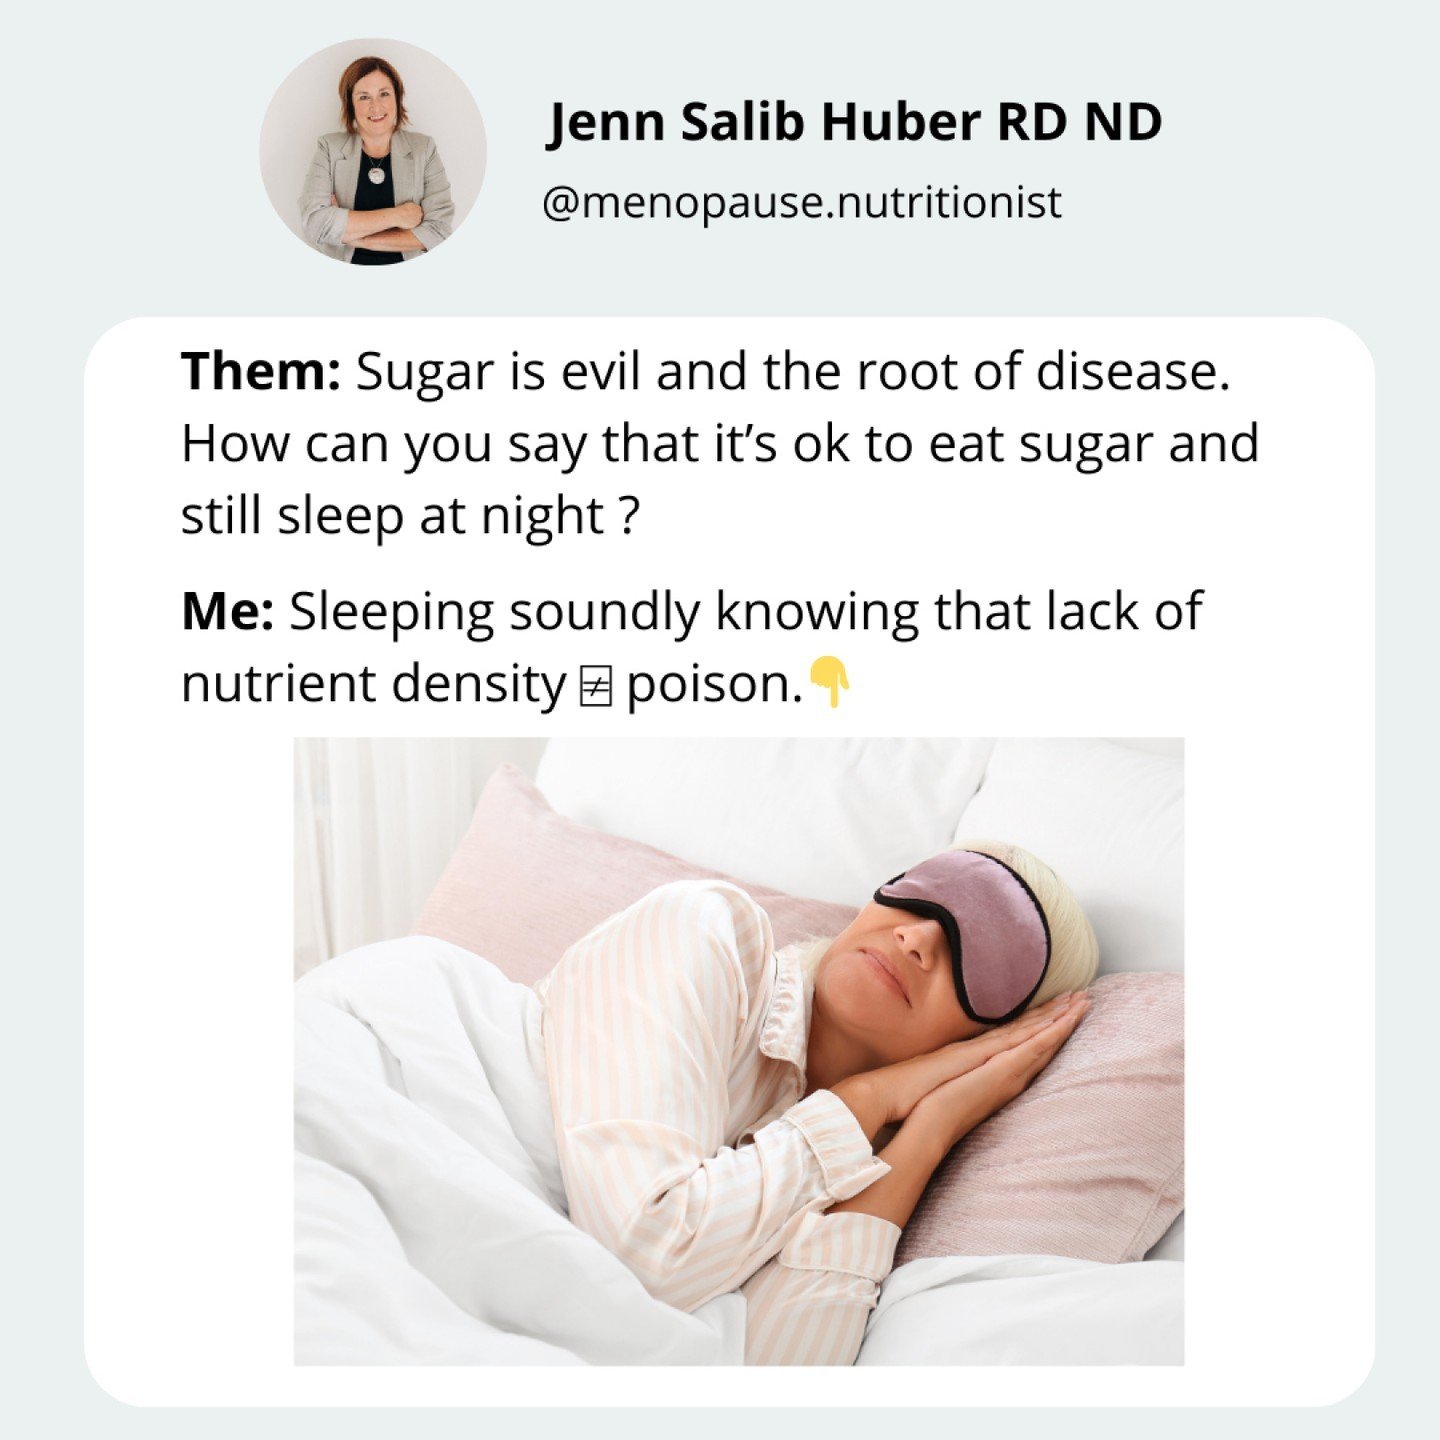 Dreaming of balance, not perfection 💤

The keyboard warriors are out again and they're coming for sugar (and me apparently) this week. 😂

There's a big difference between the risks associated with patterns of eating that lack nutrient density vs ea